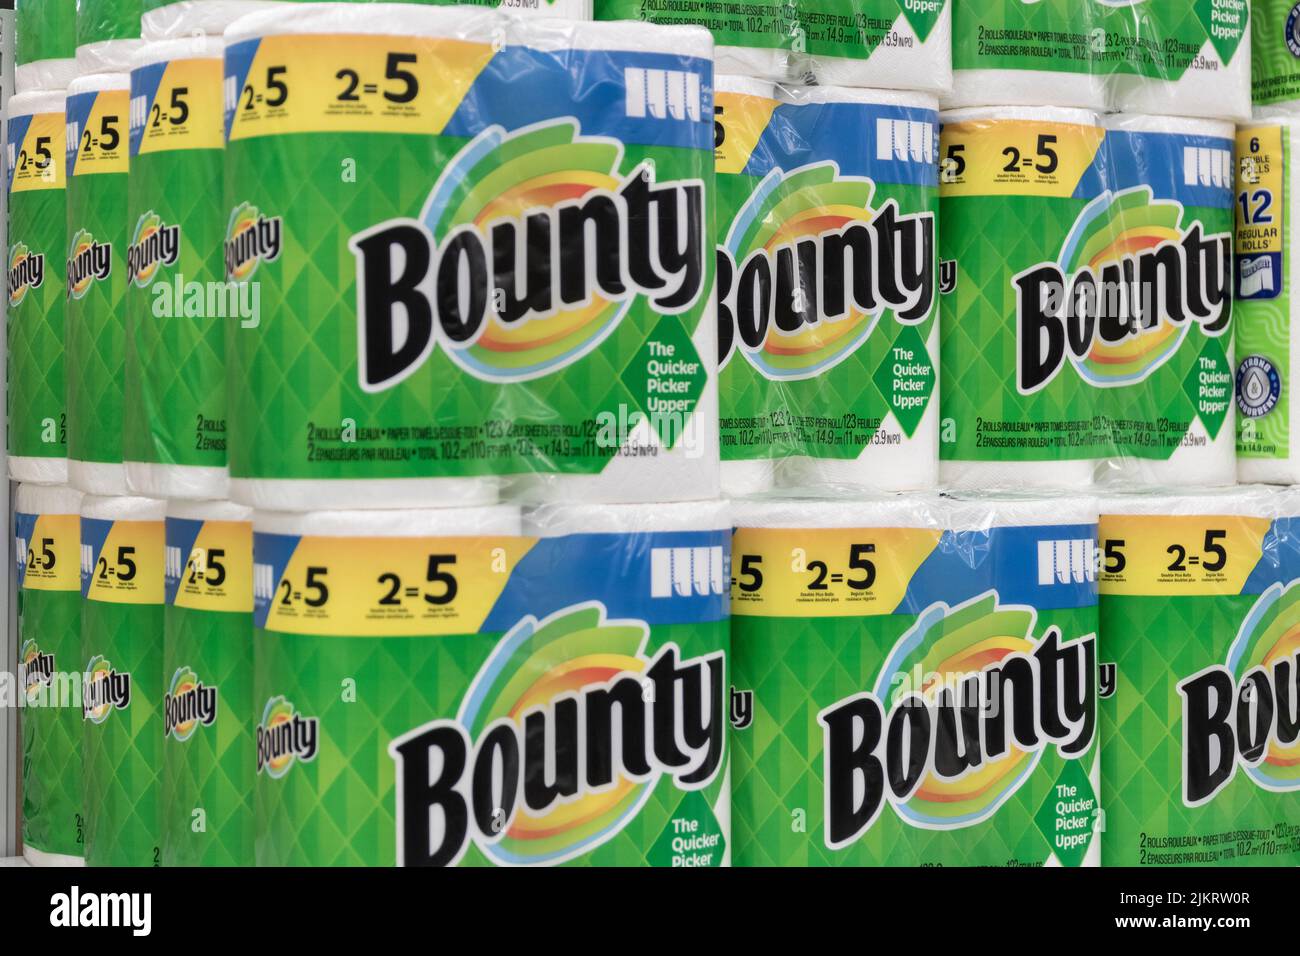 Indianapolis - Circa July 2022: Bounty paper towel display. Bounty is a paper towel product manufactured by Procter & Gamble (P&G). Stock Photo